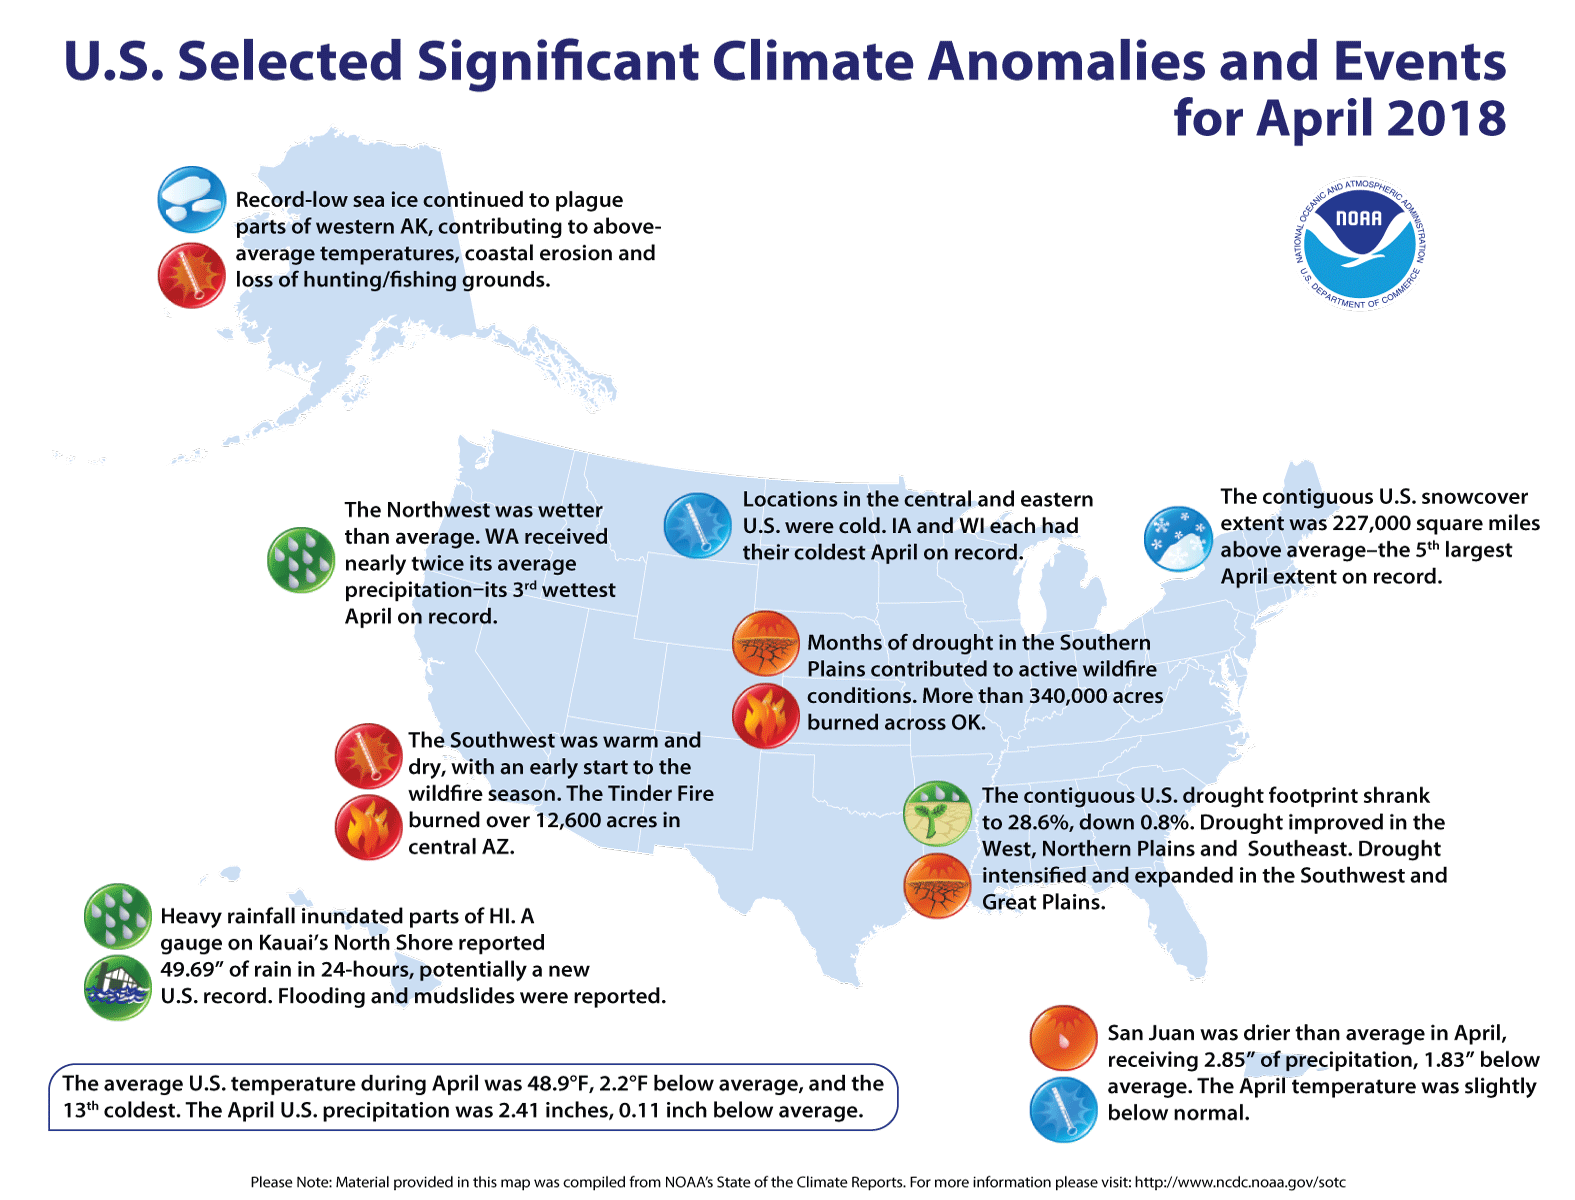 An annotated map of the U.S. showing other climate events that occurred in April 2018.  For details, see the bulleted list below in our story and visit http://www.ncdc.gov/sotc/summary-info/national/201804.